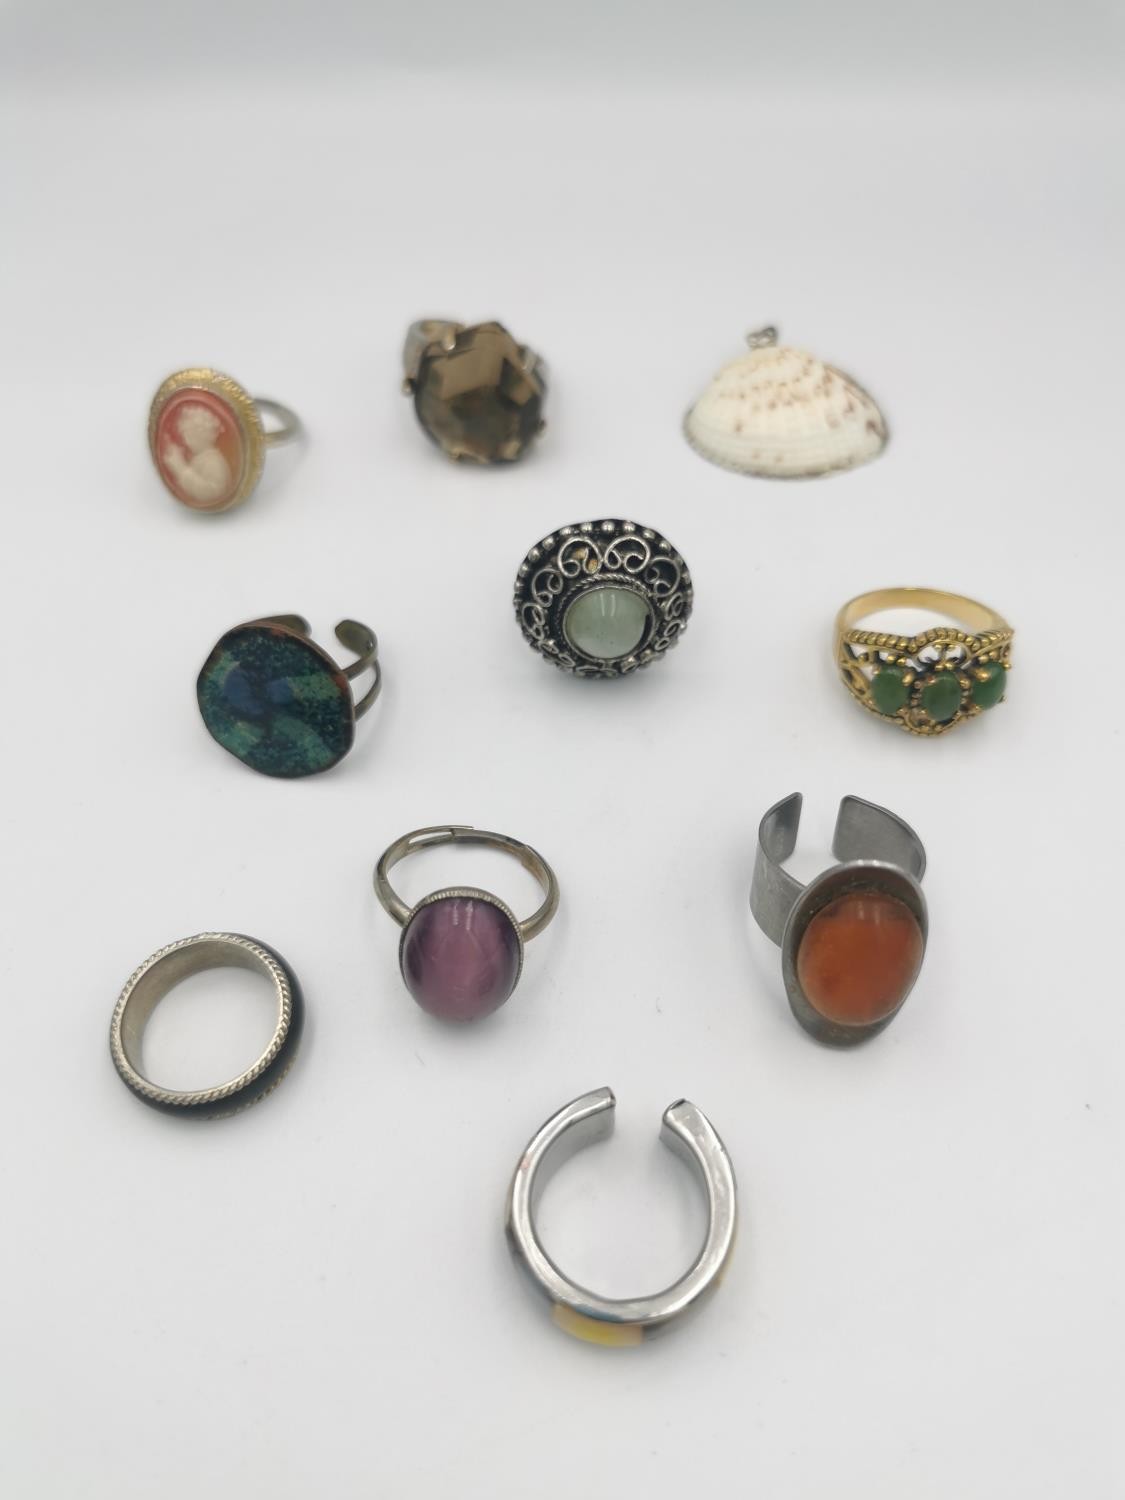 A large collection of vintage and antique rings of various designs. - Image 3 of 7